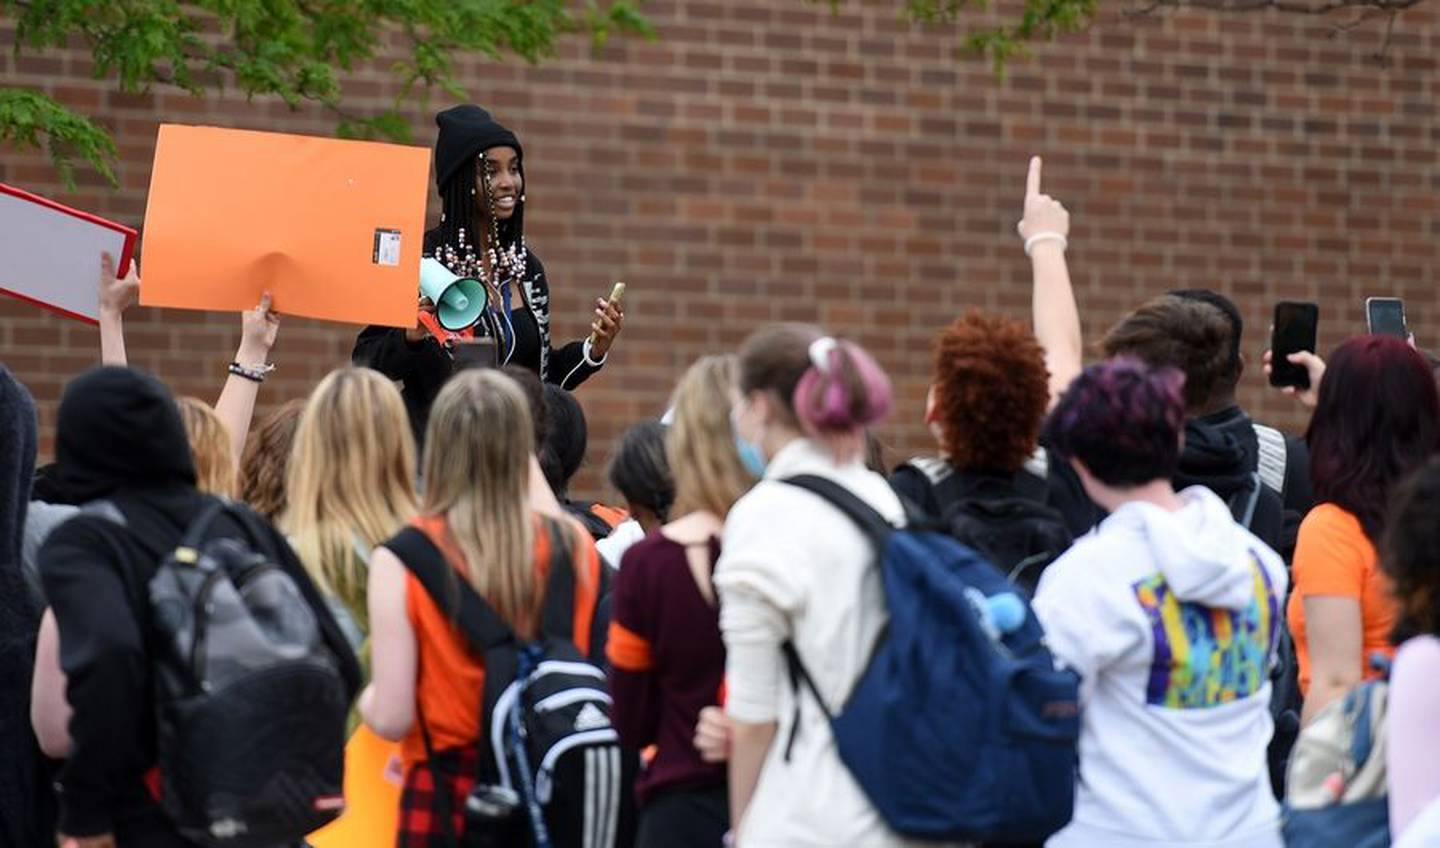 Mitchell Kariuki takes the megaphone to address the crowd at South Elgin High School who walked out of school as part of a nationwide effort to end gun violence. "It breaks my heart that I have to go to school everyday wondering if I'm safe. Every practice drill doesn't feel like a practice drill, it feels like real life," Kariuki said.